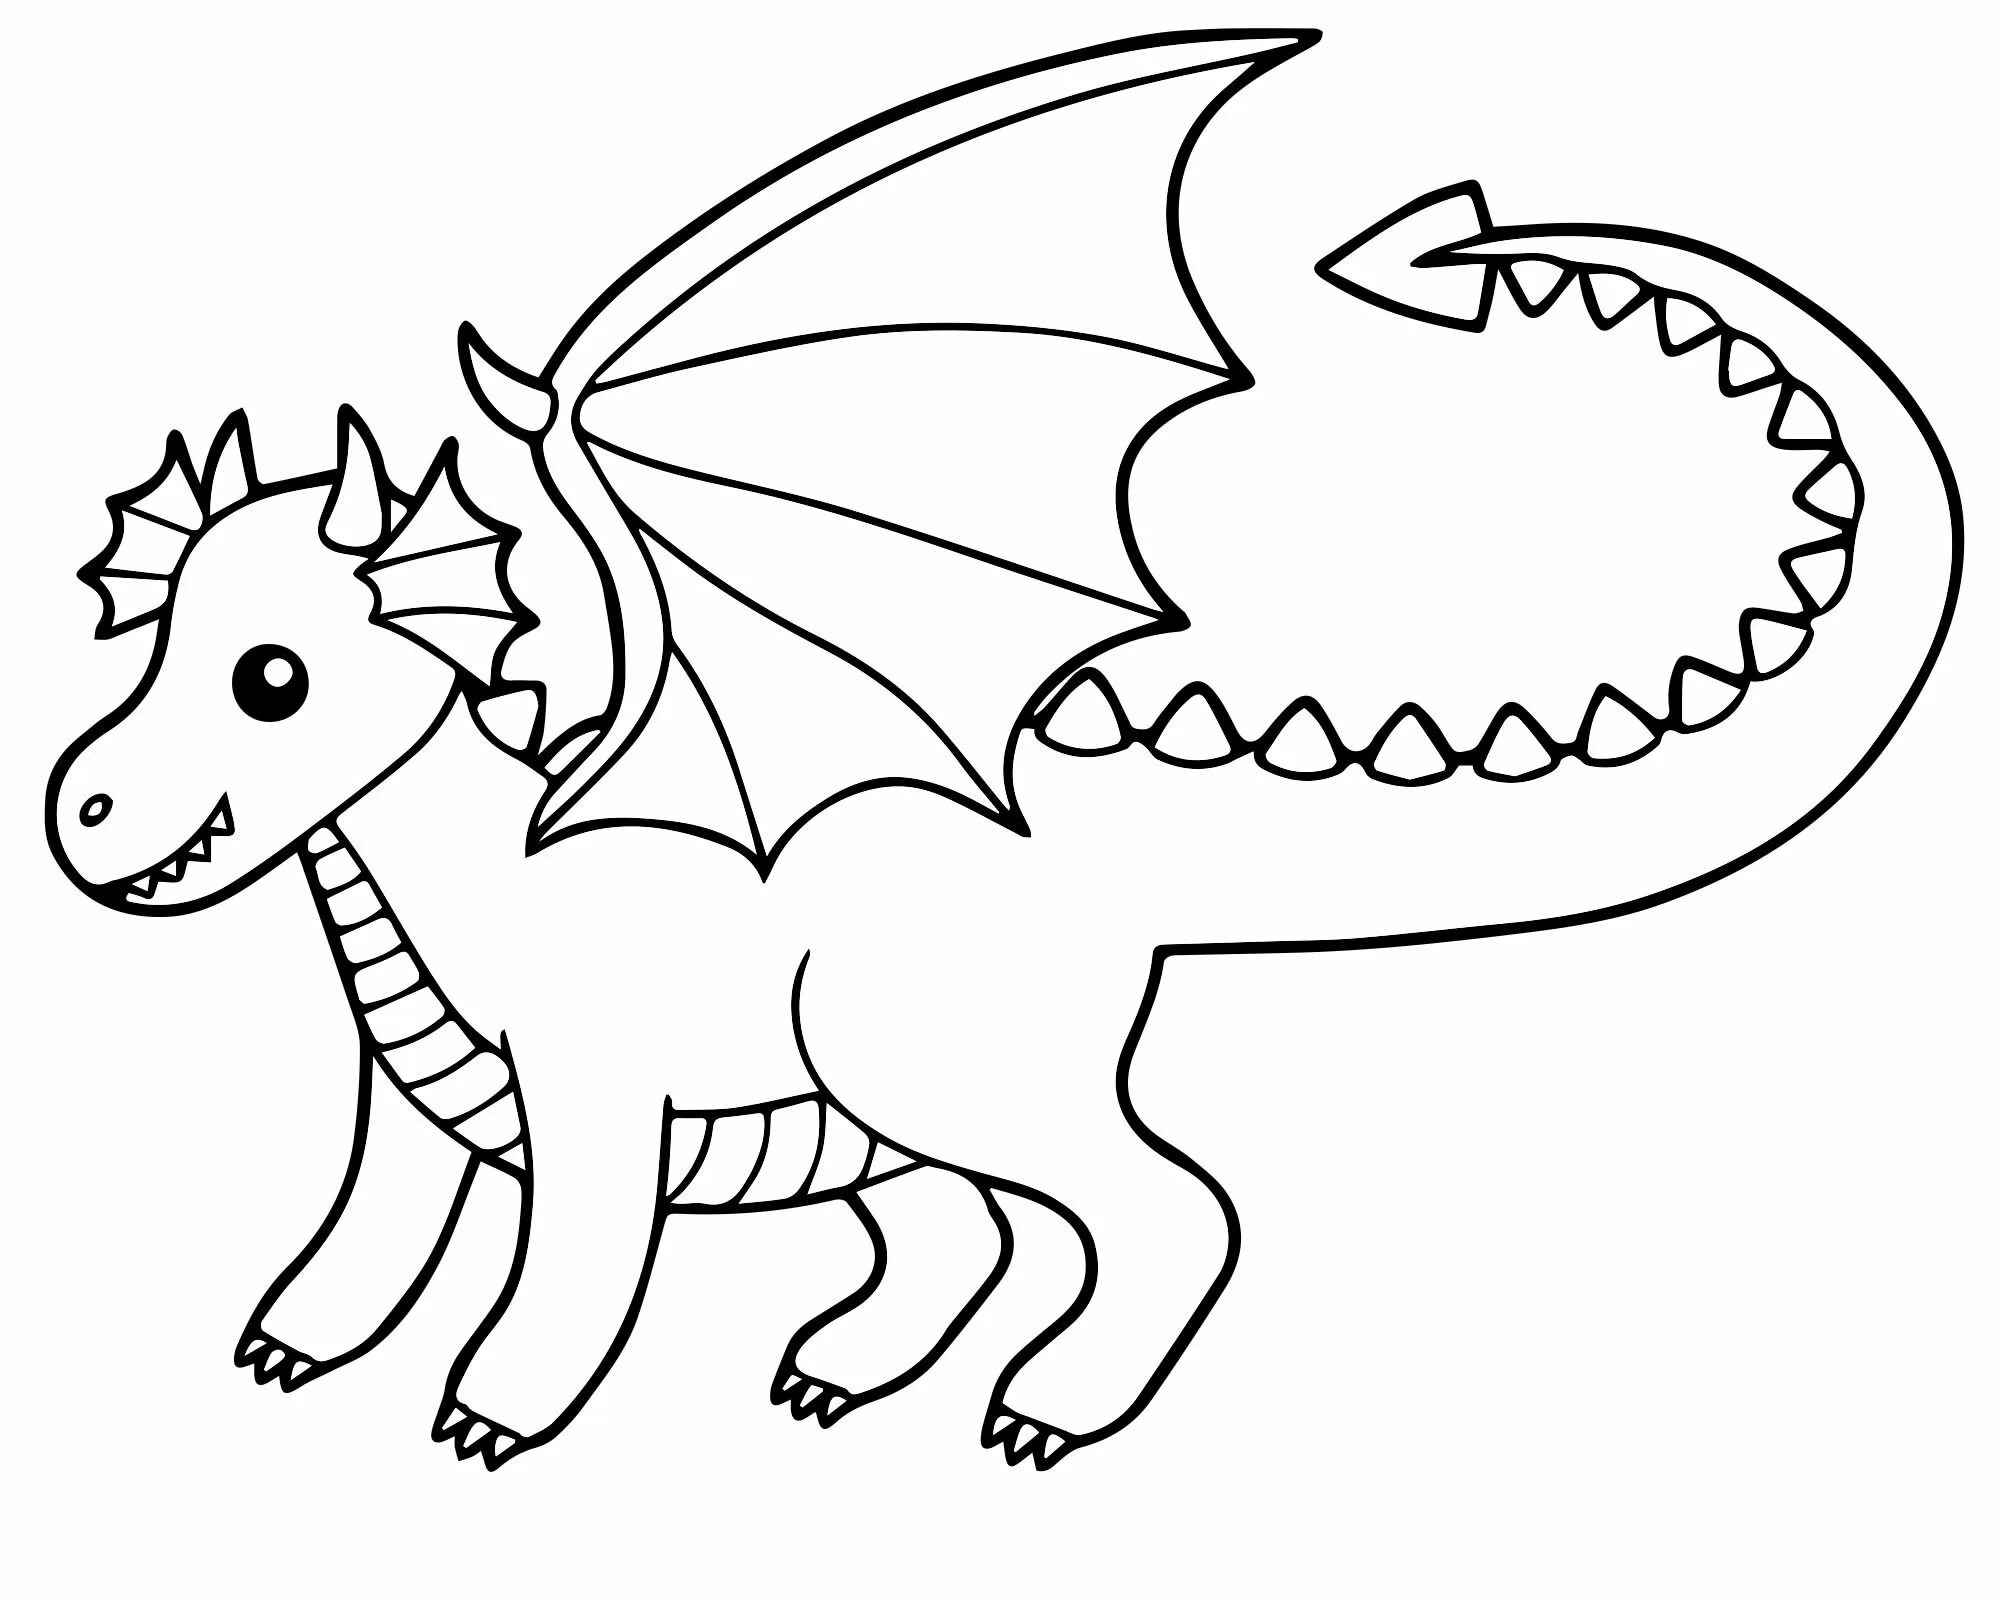 Outstanding dragon coloring book for kids